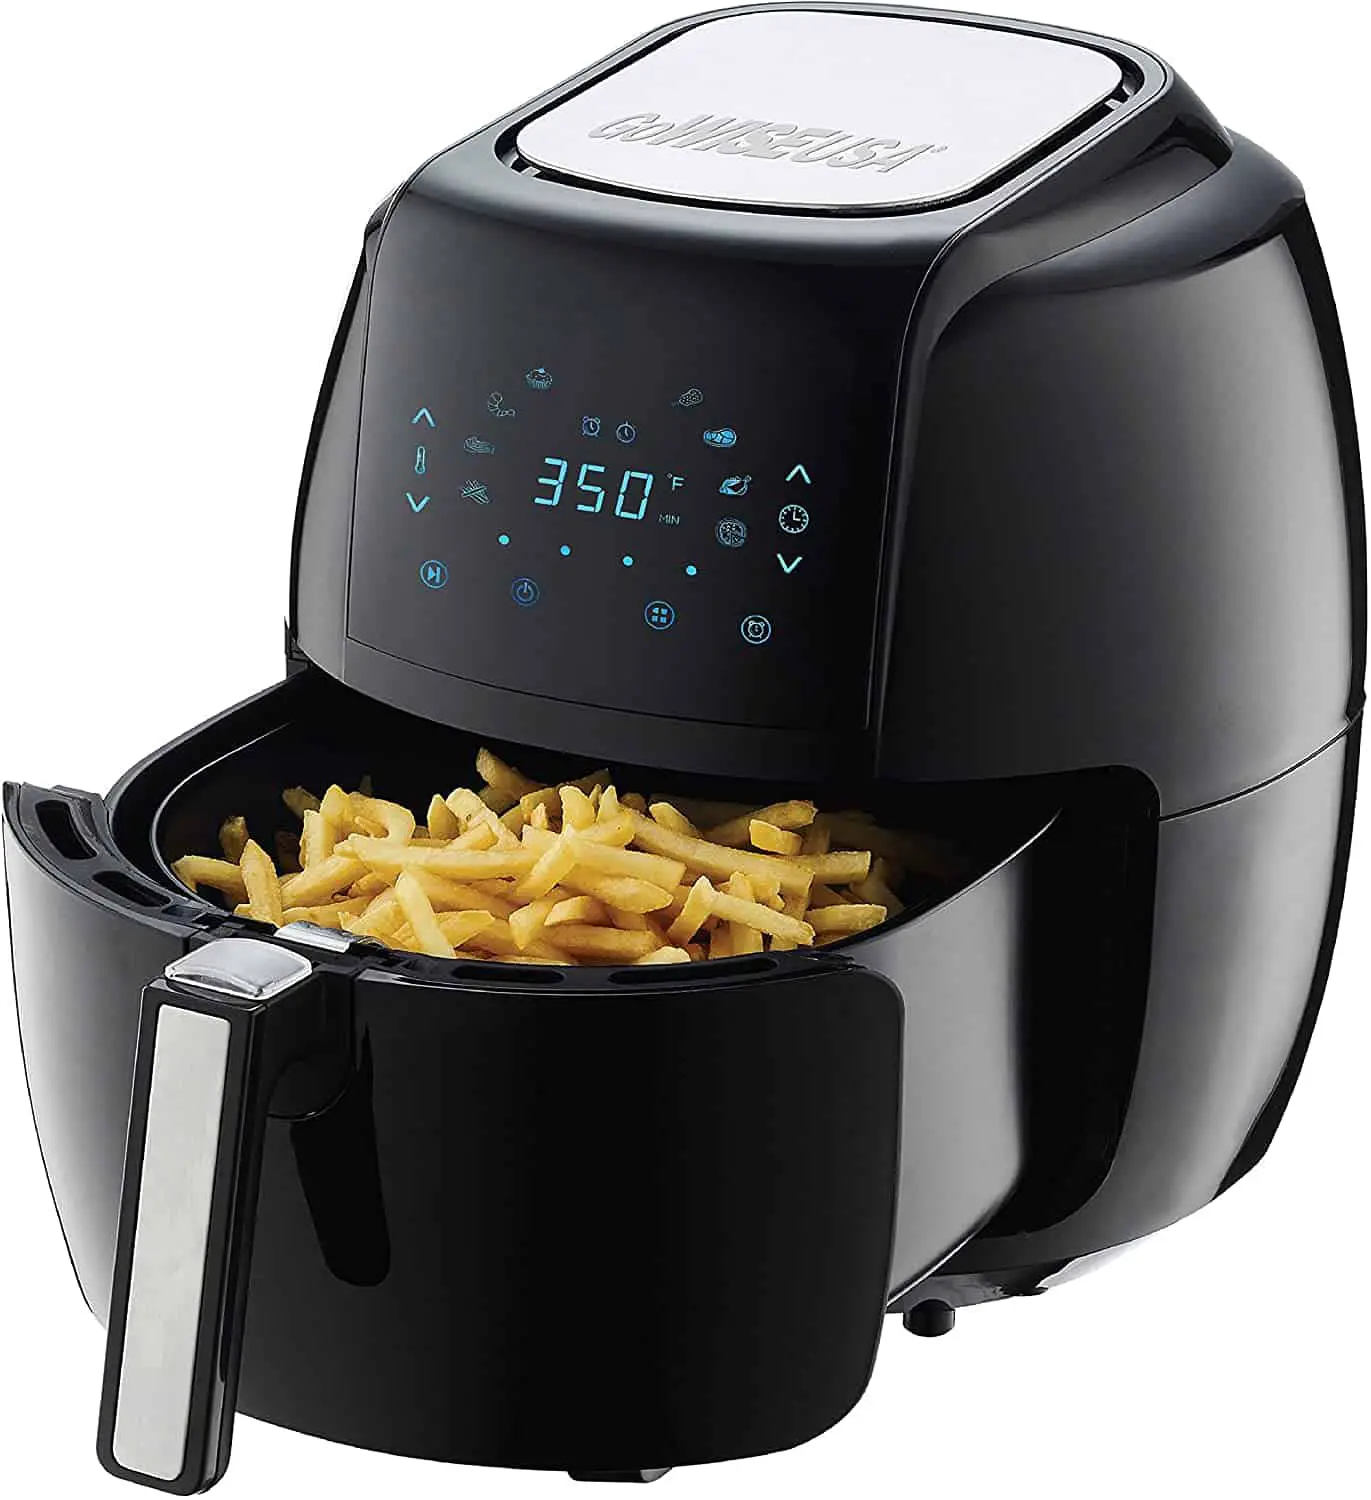 Grab This GoWISE Air Fryer For Only $49